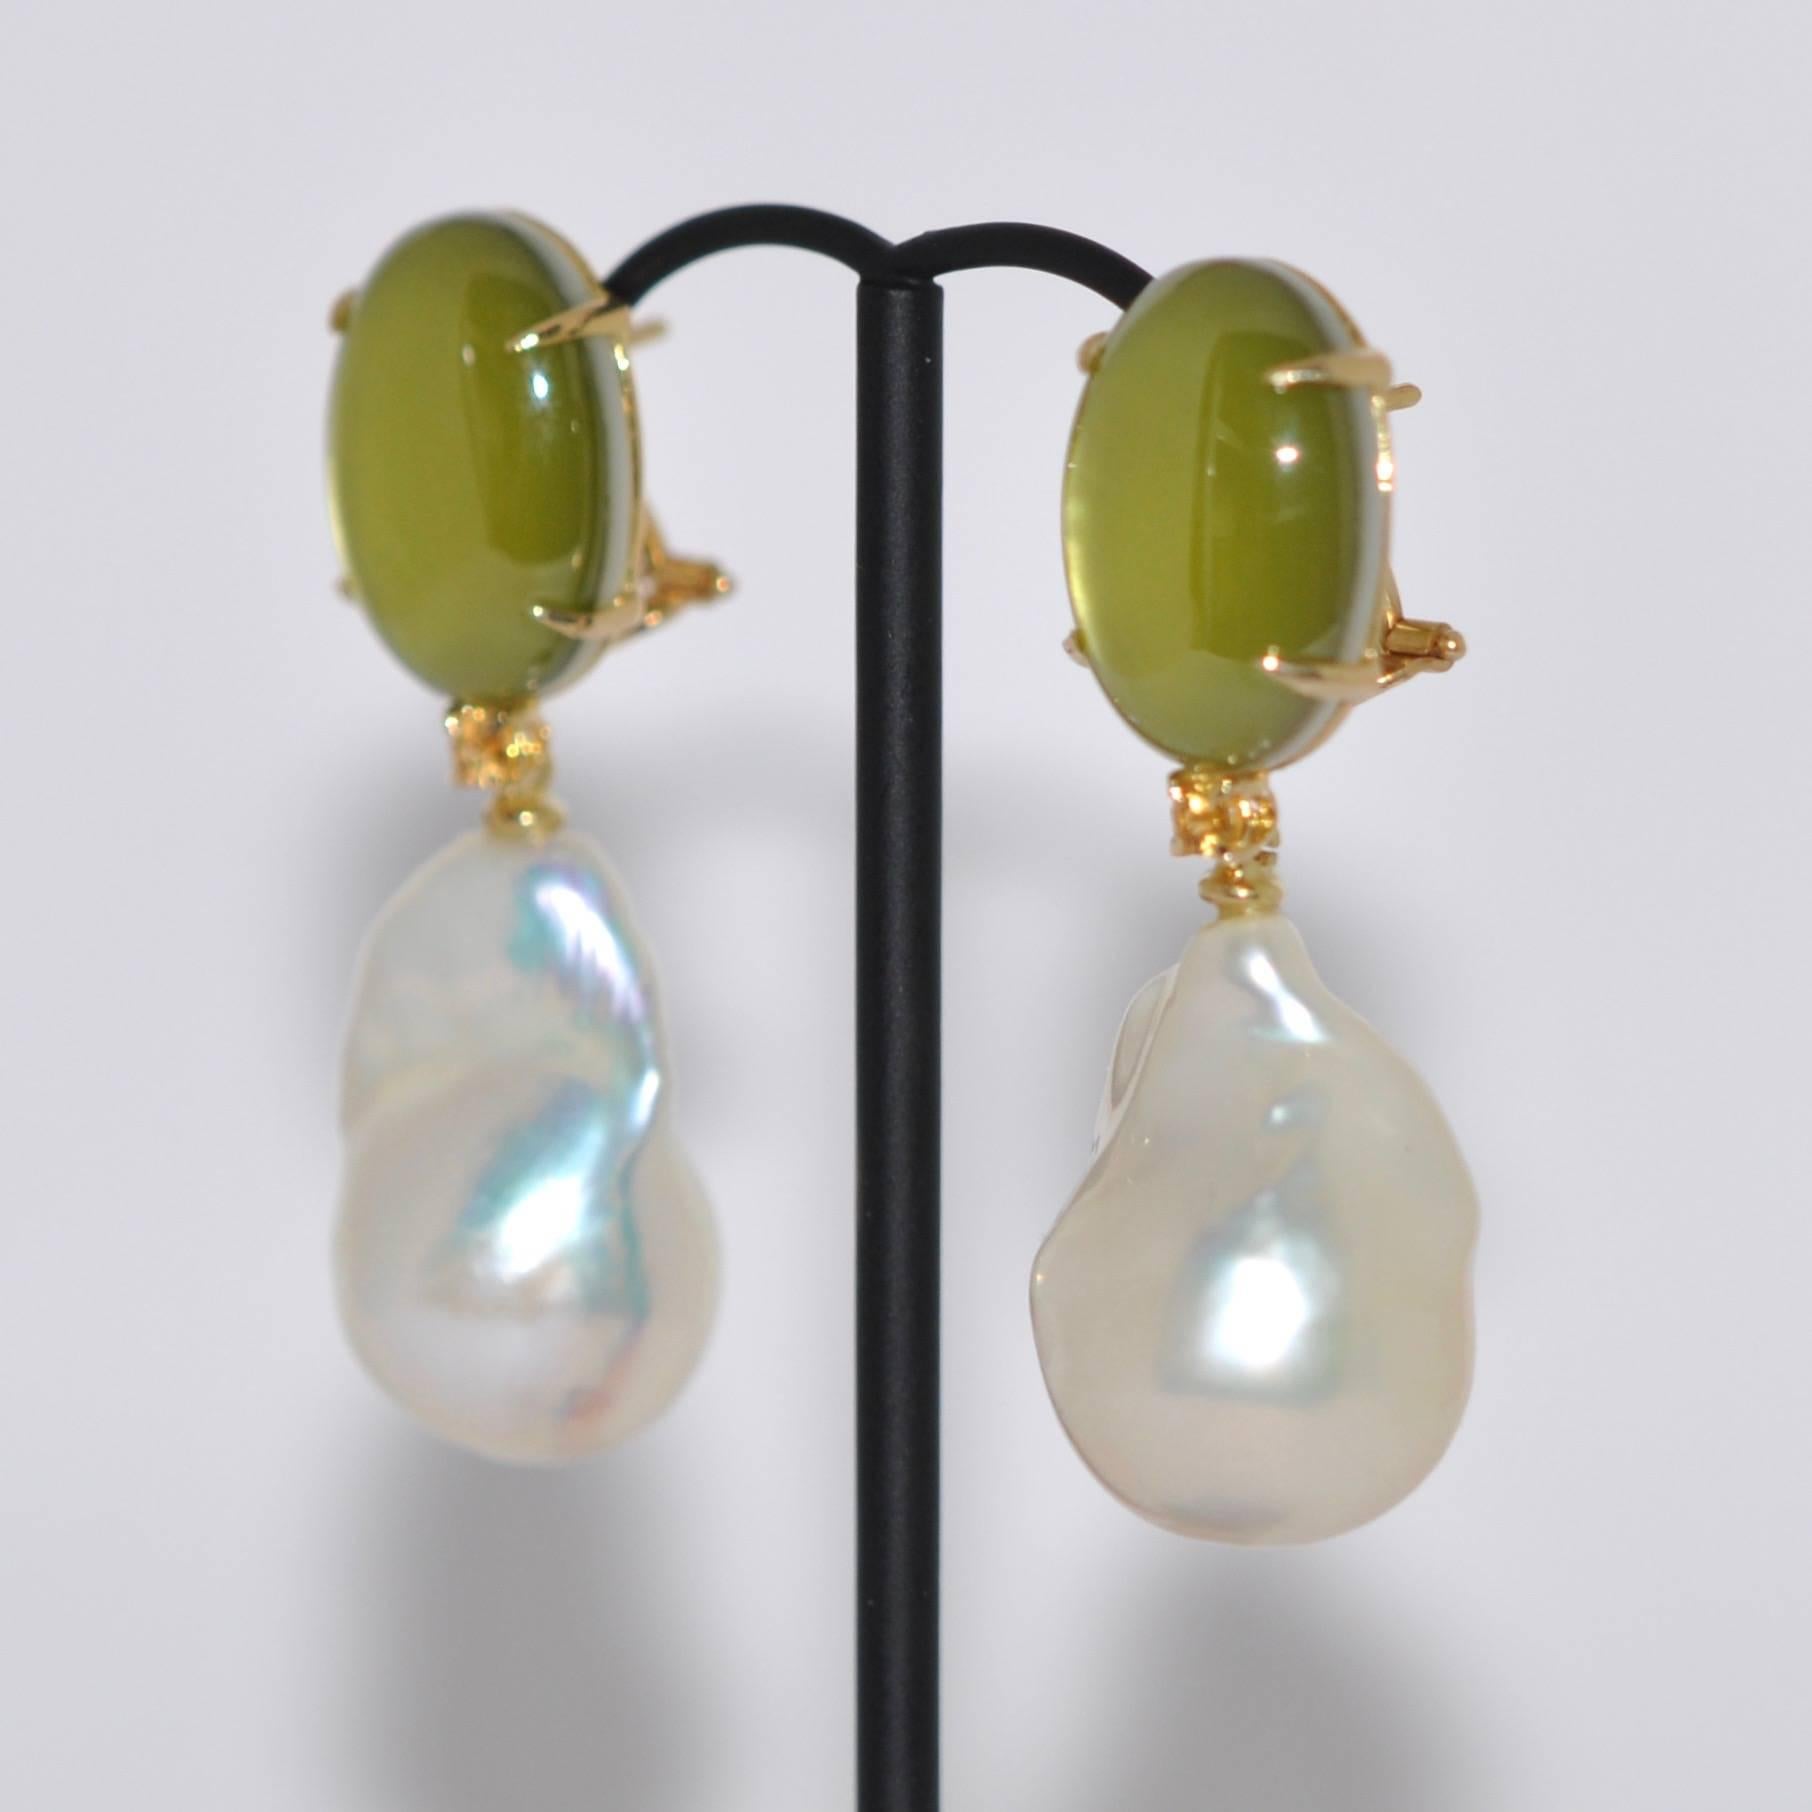 Discover this Green Quartz, Pearls and Yellow Sapphires, Yellow Gold Chandelier Earrings.
Green Quartz
Yellow Sapphires 0.16 Carat
Yellow Gold 18 Carat 